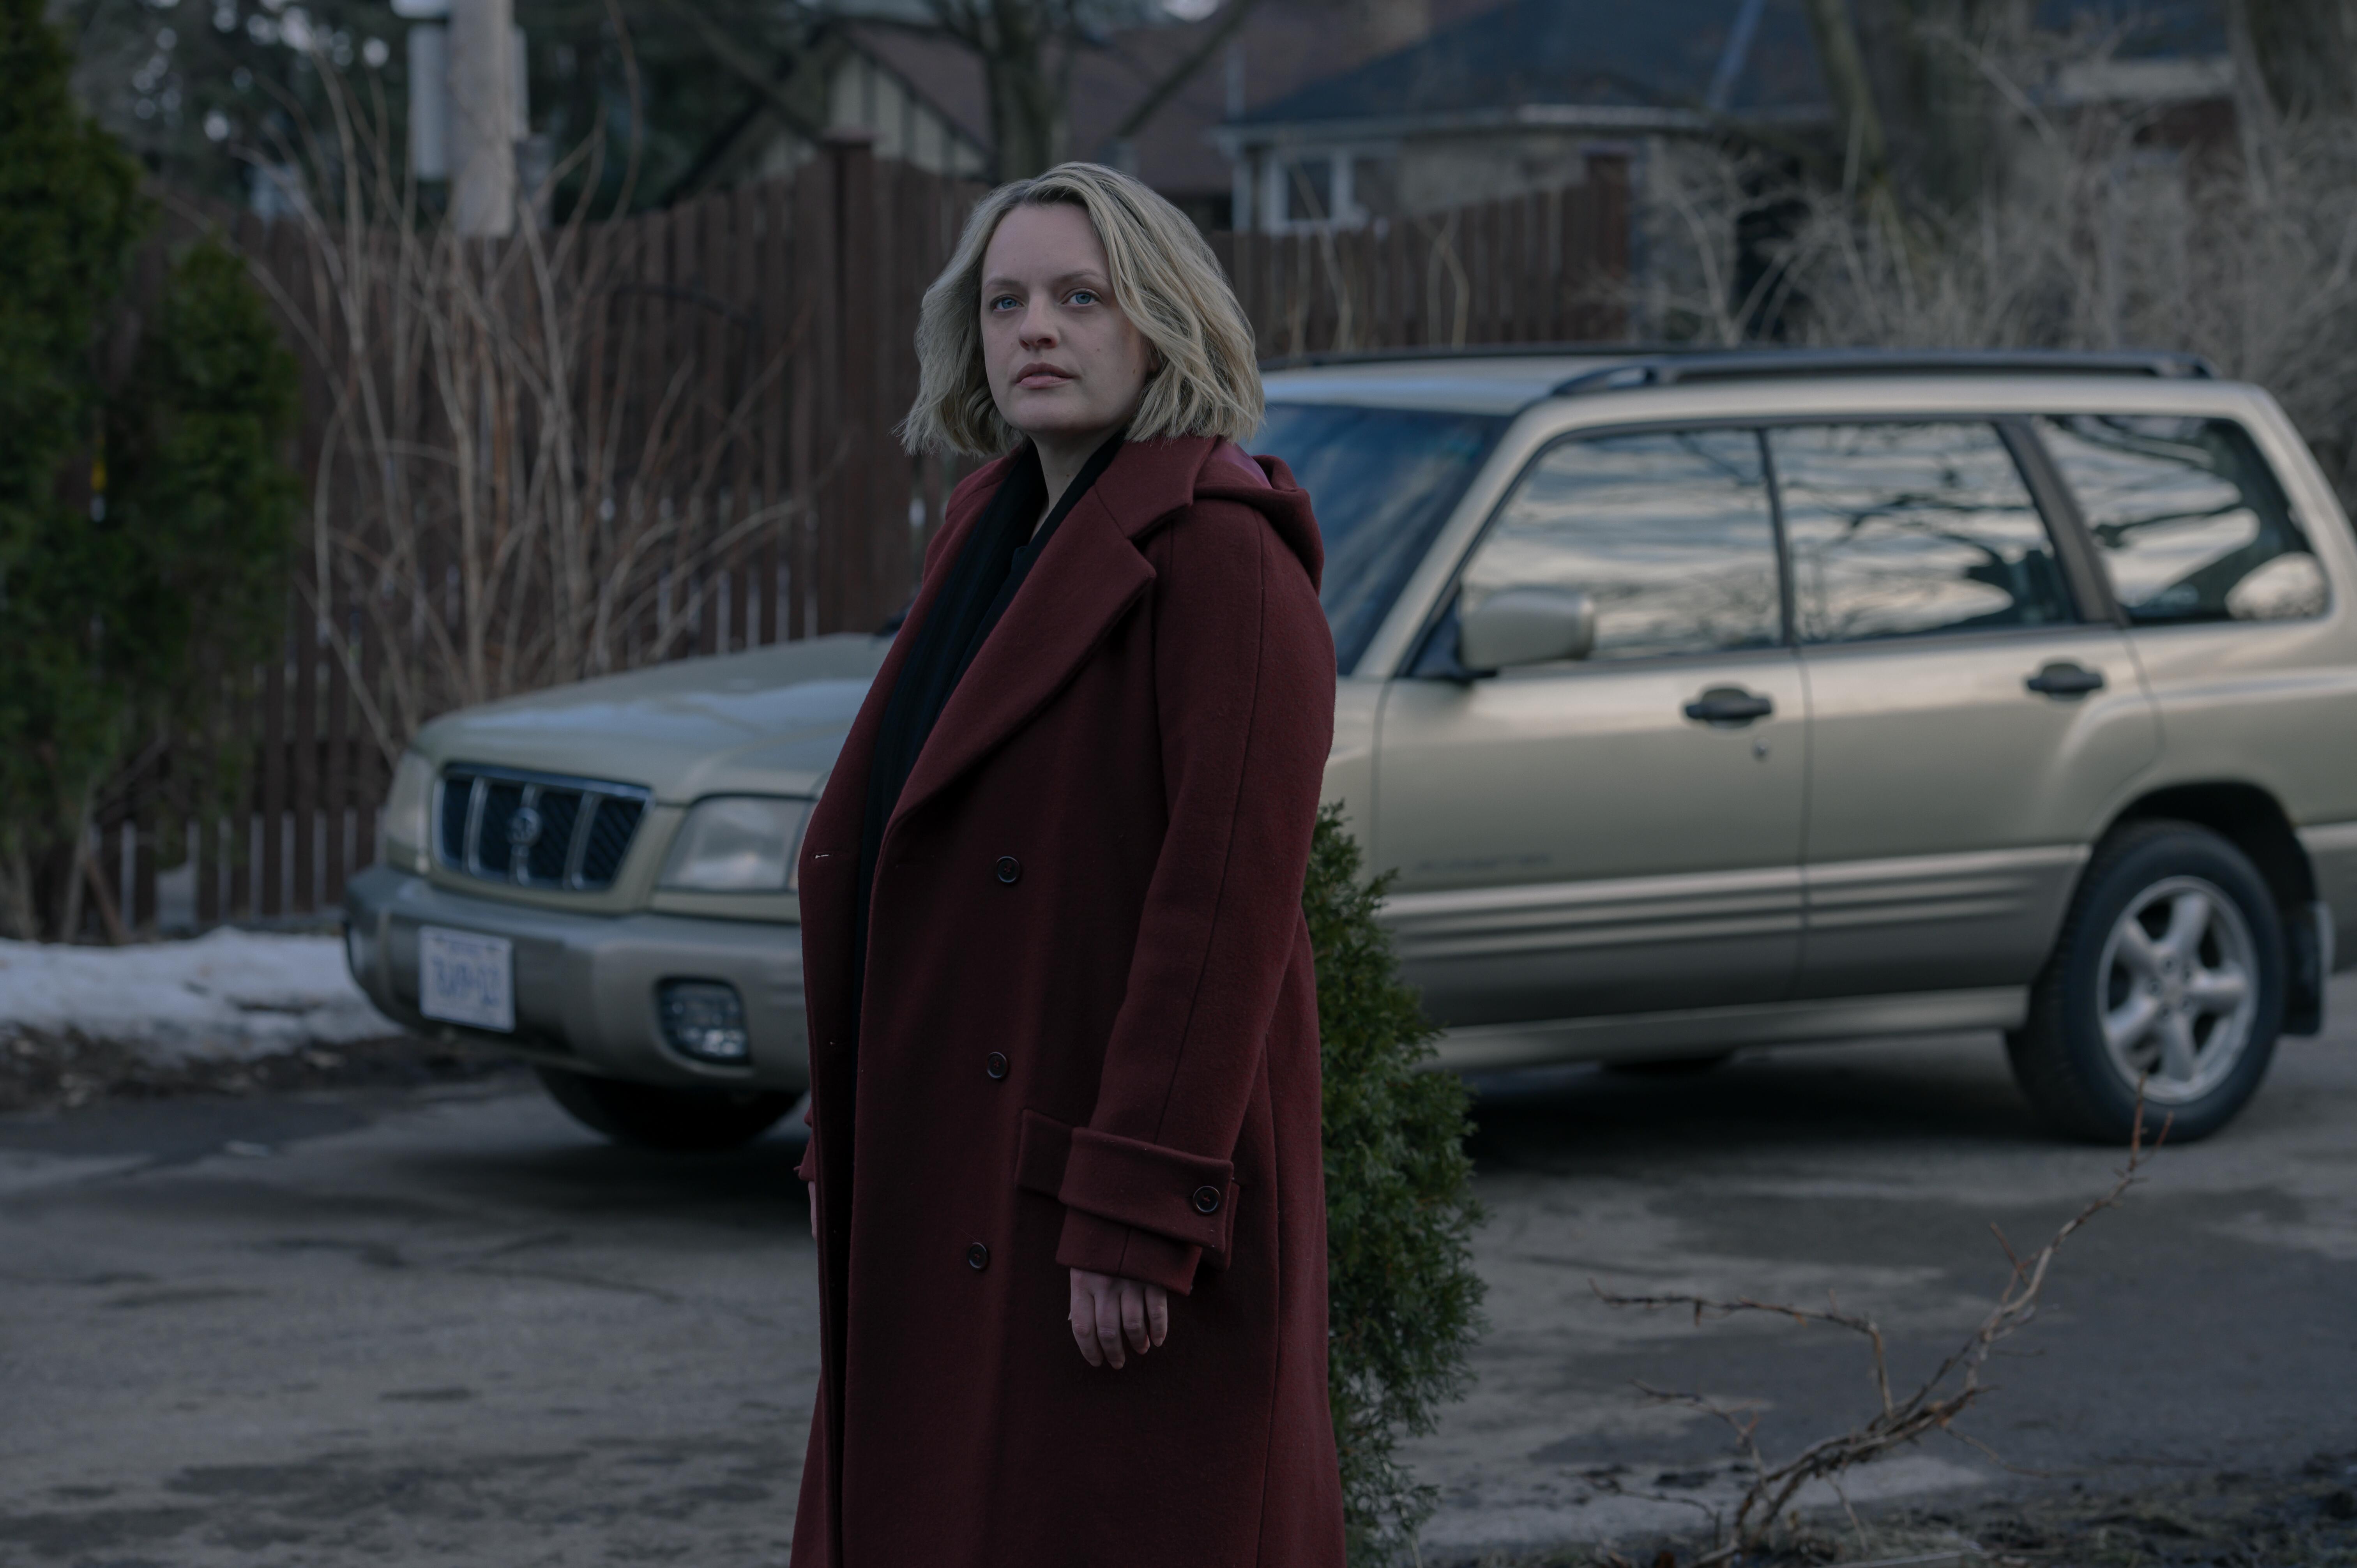 June stands near a car in season 4 of 'The Handmaid's Tale'